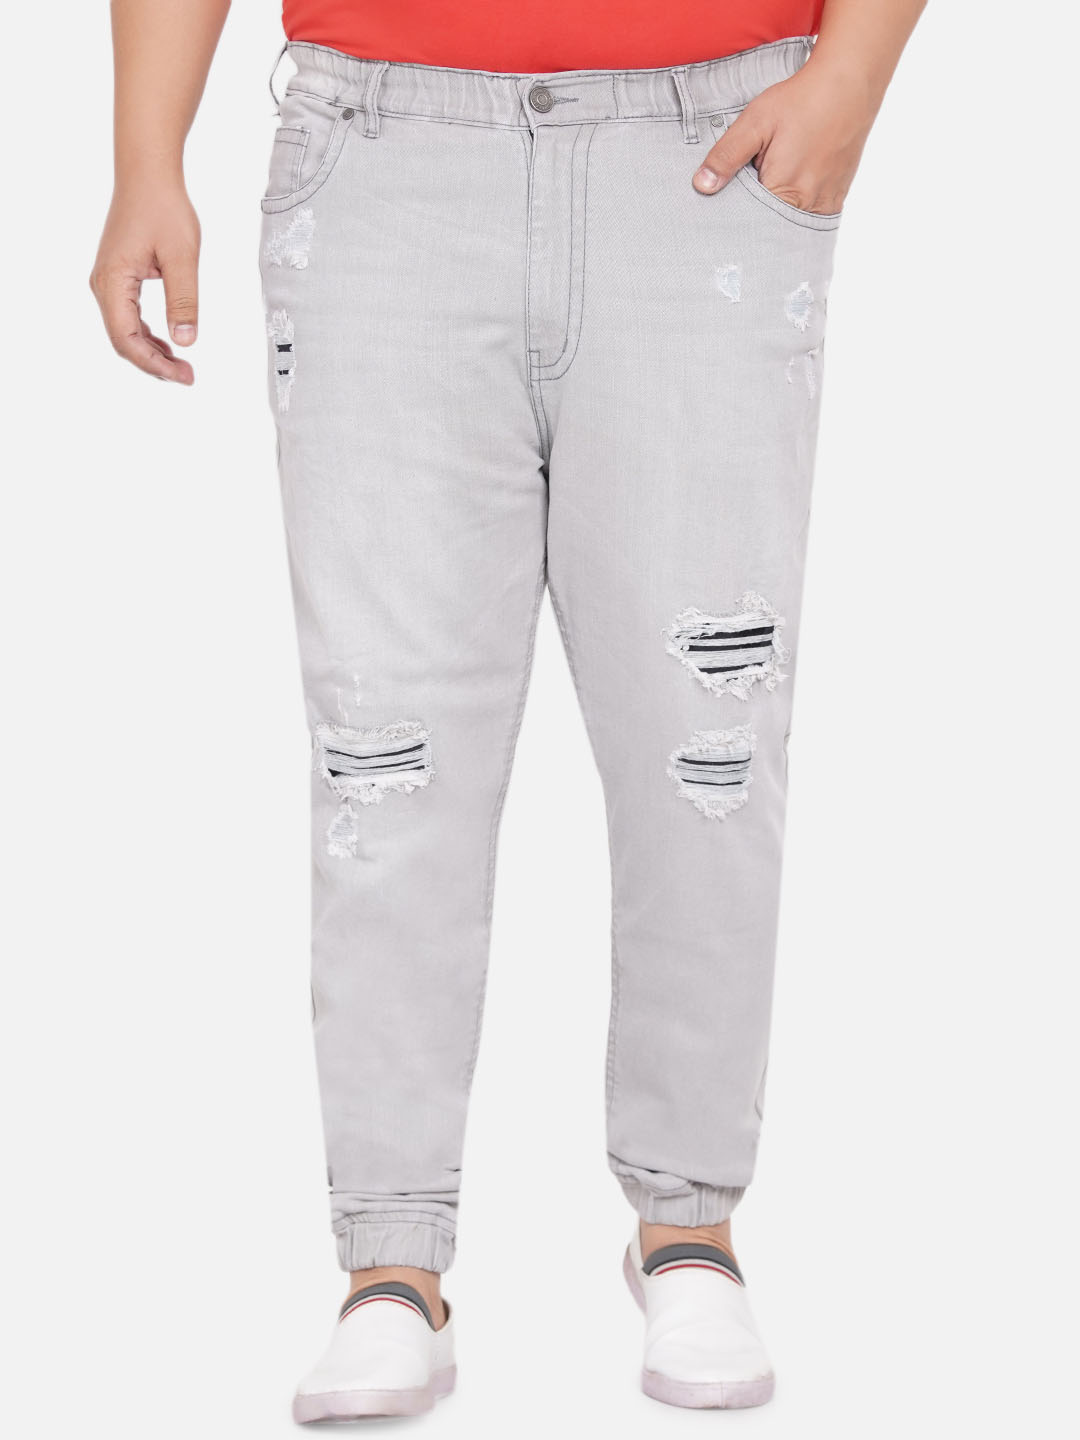 The Edgy Joggers